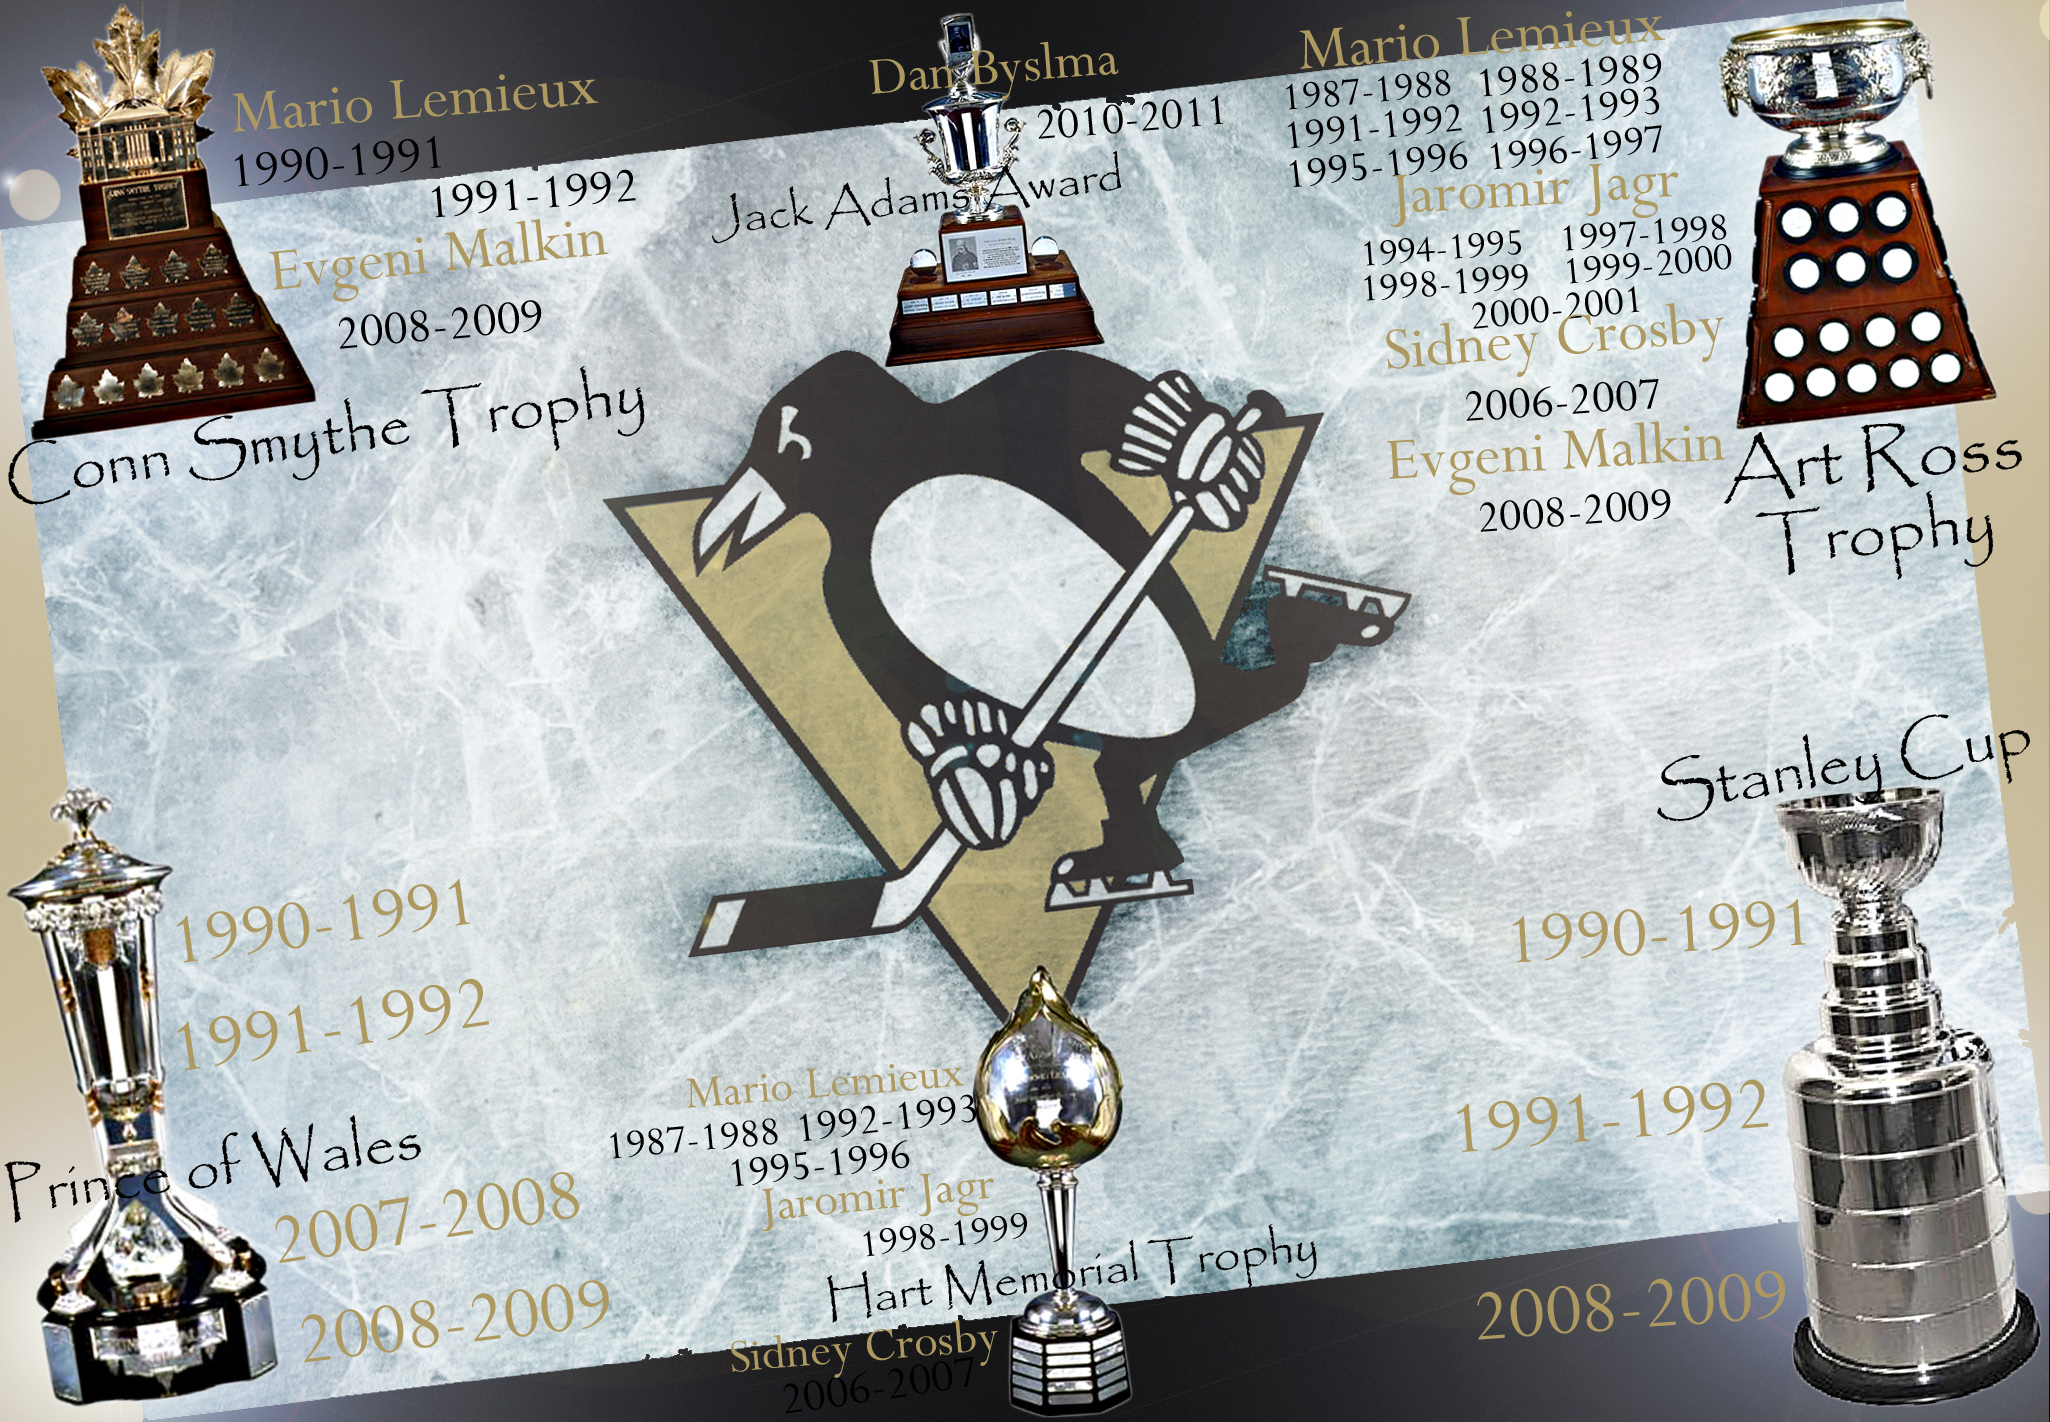 Pittsburgh Penguins Wallpaper Image Crazy Gallery